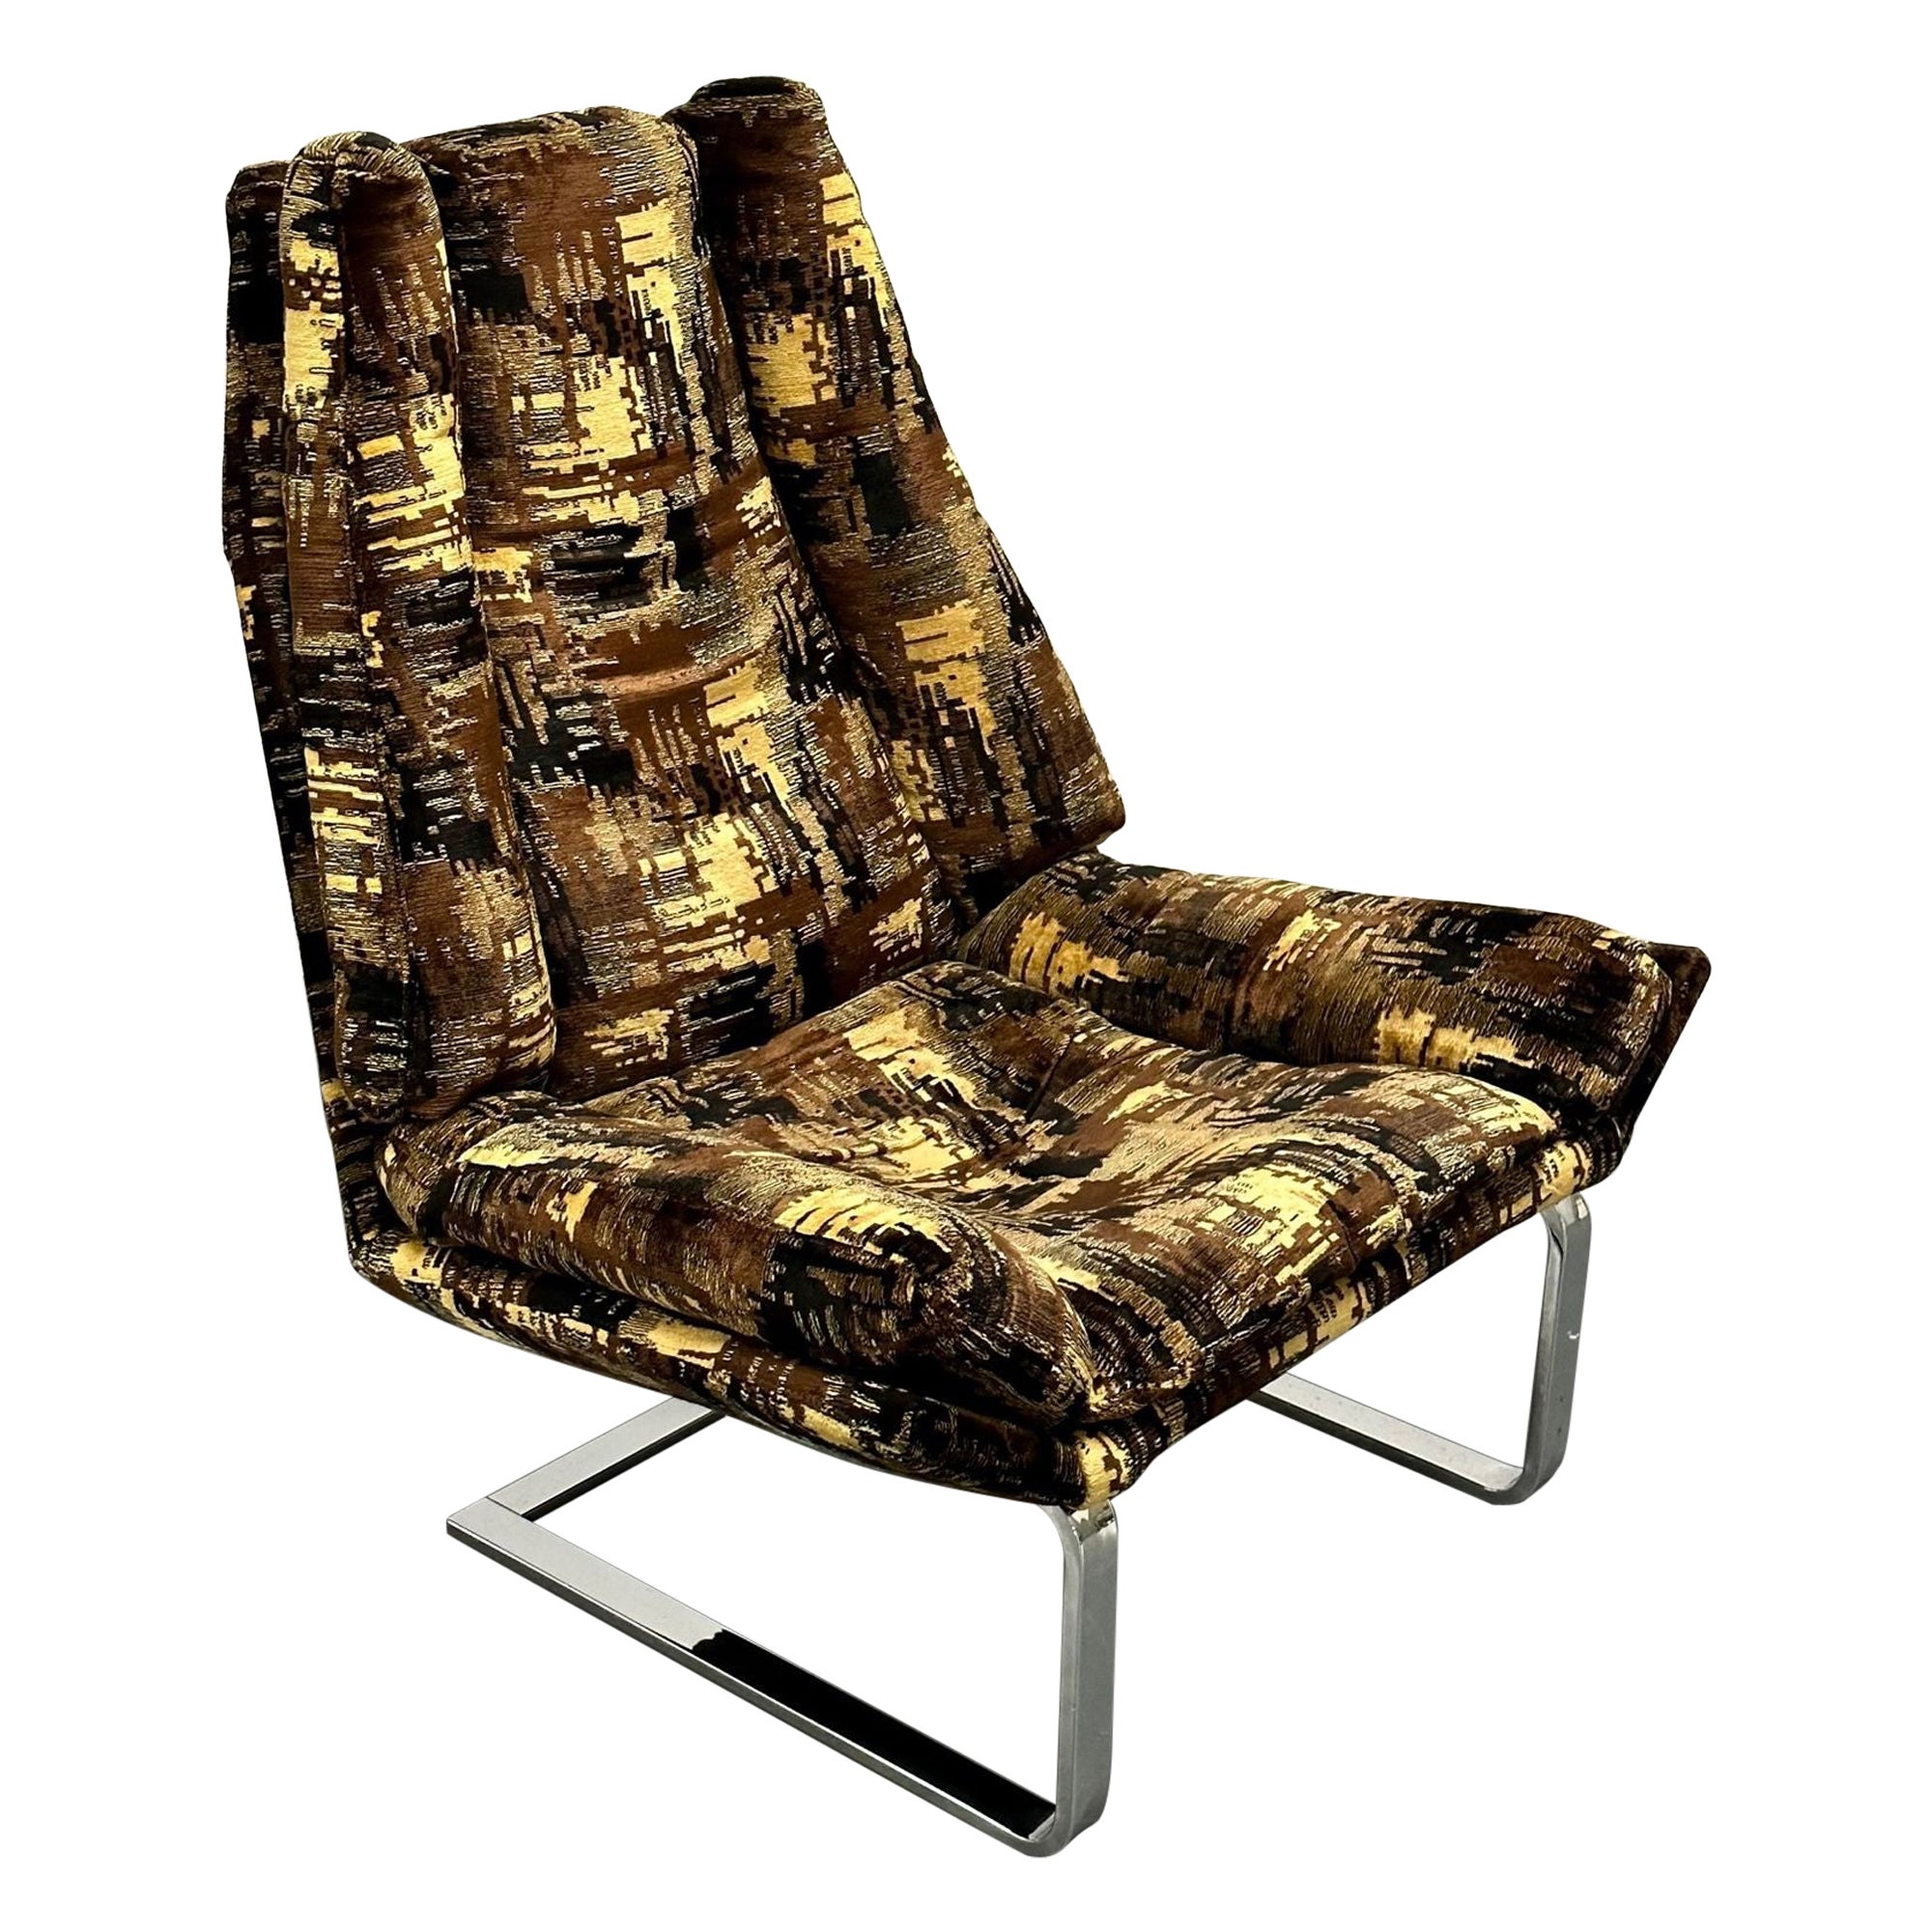 Mid-Century Modern Lounge Chair, Adrian Pearsall Style, American, Chrome, 1950s For Sale